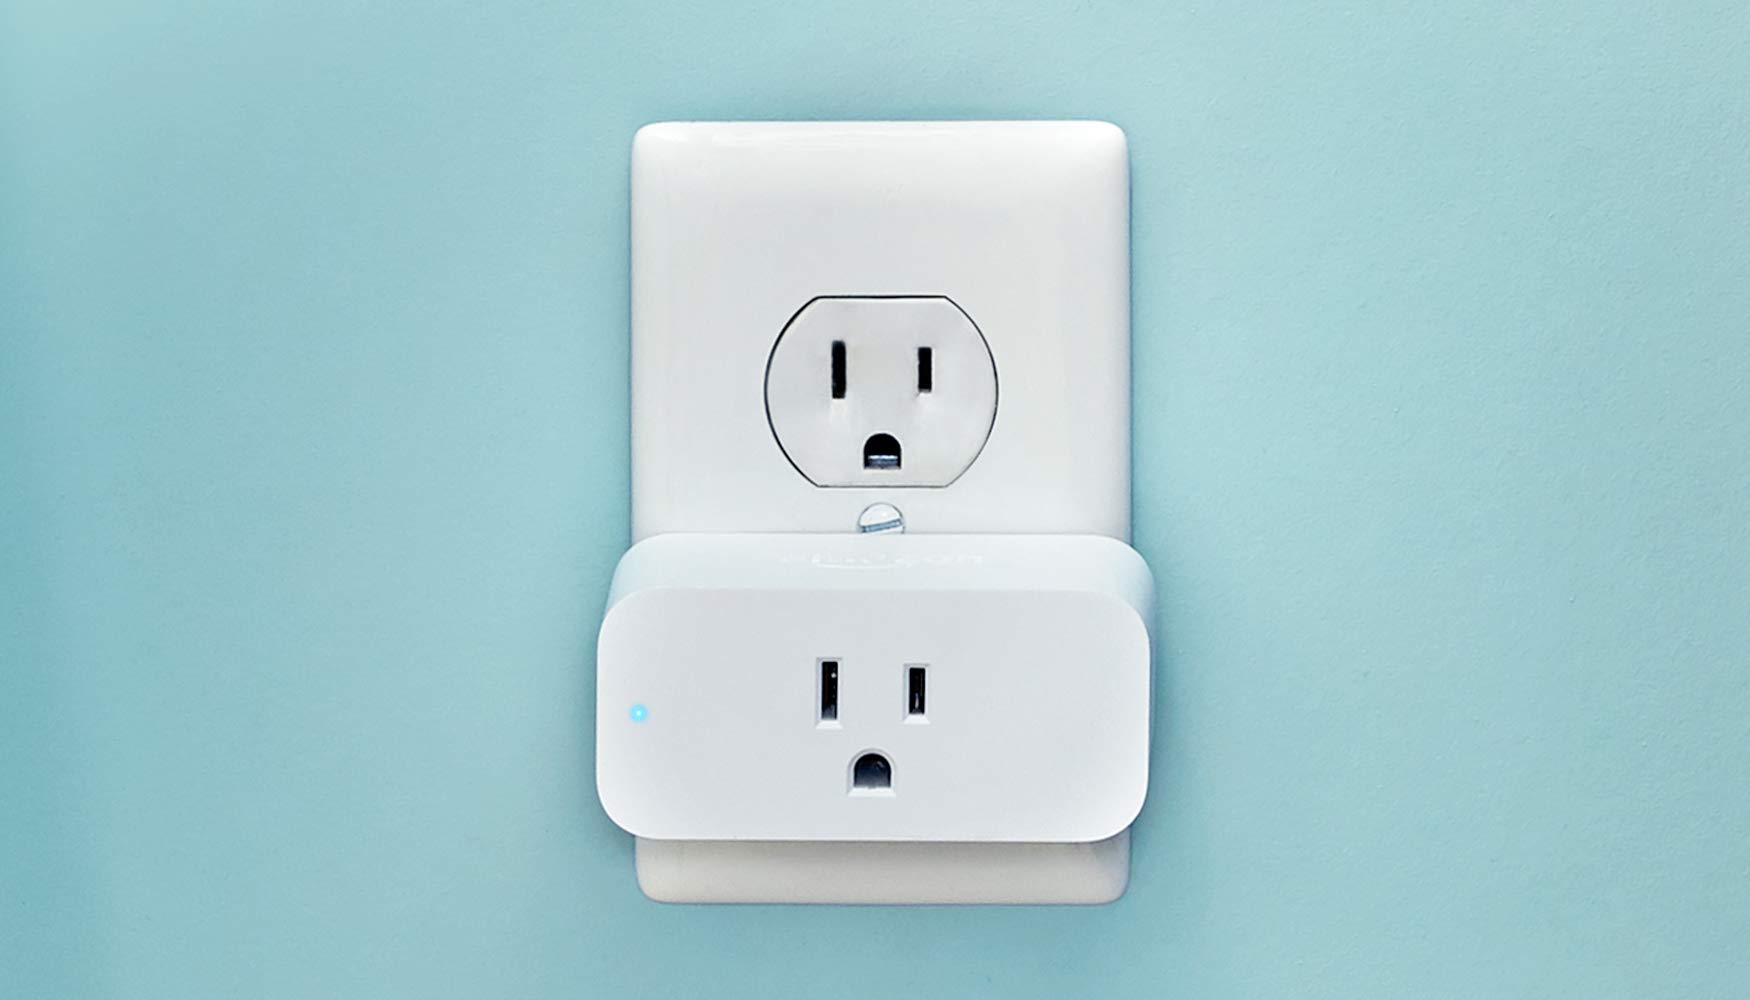 Amazon Smart Plug, works with Alexa – A Certified for Humans Device